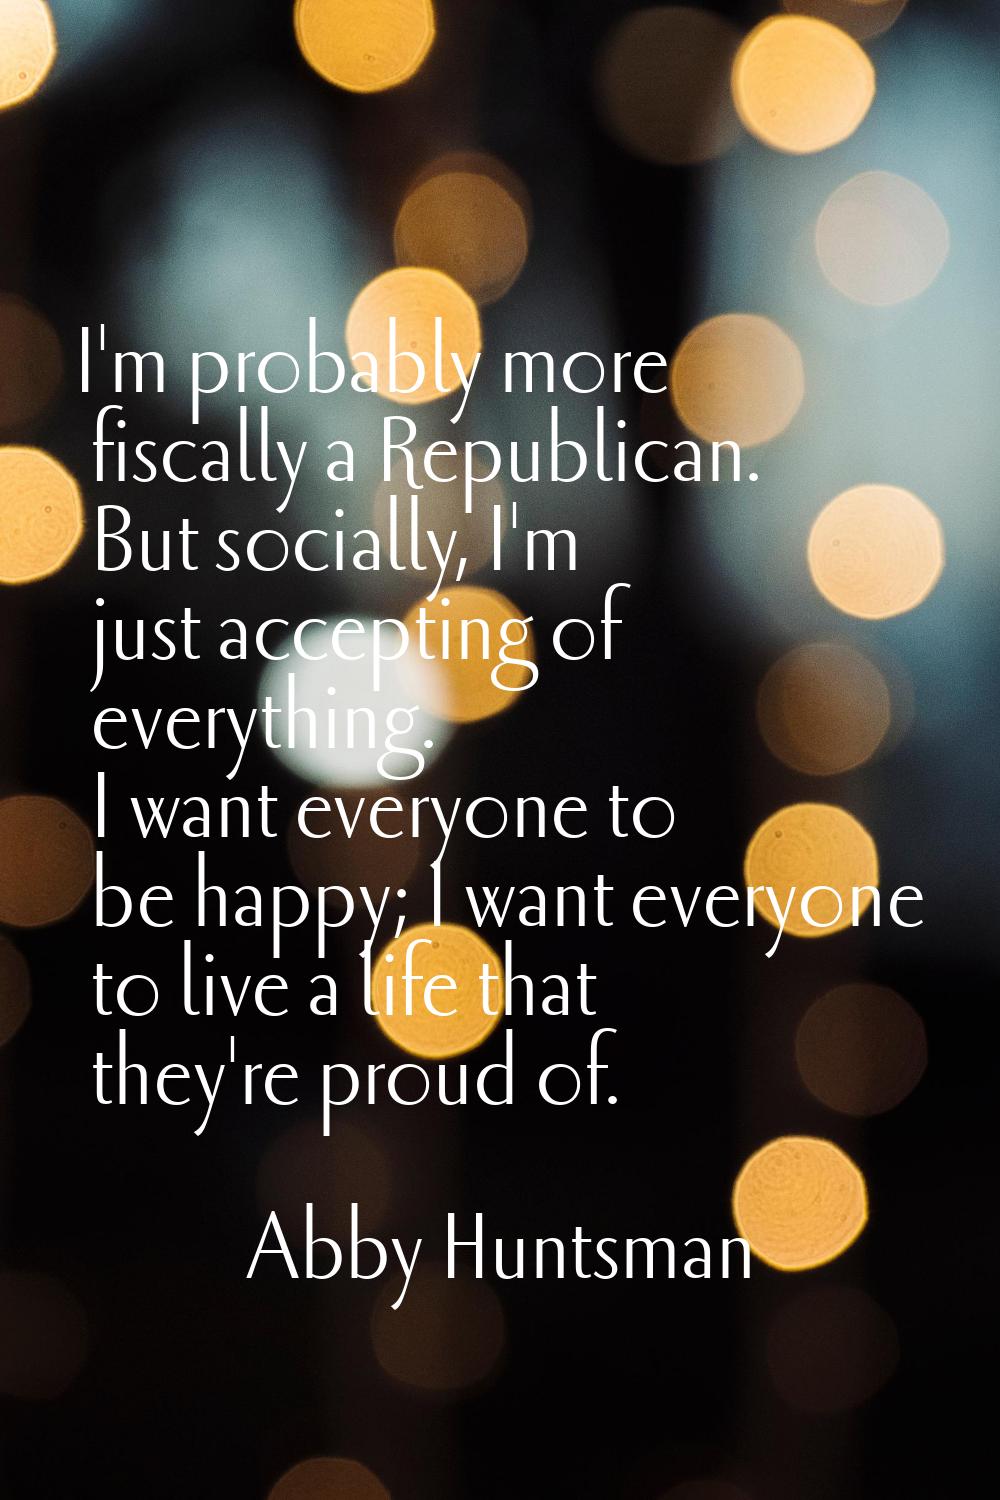 I'm probably more fiscally a Republican. But socially, I'm just accepting of everything. I want eve